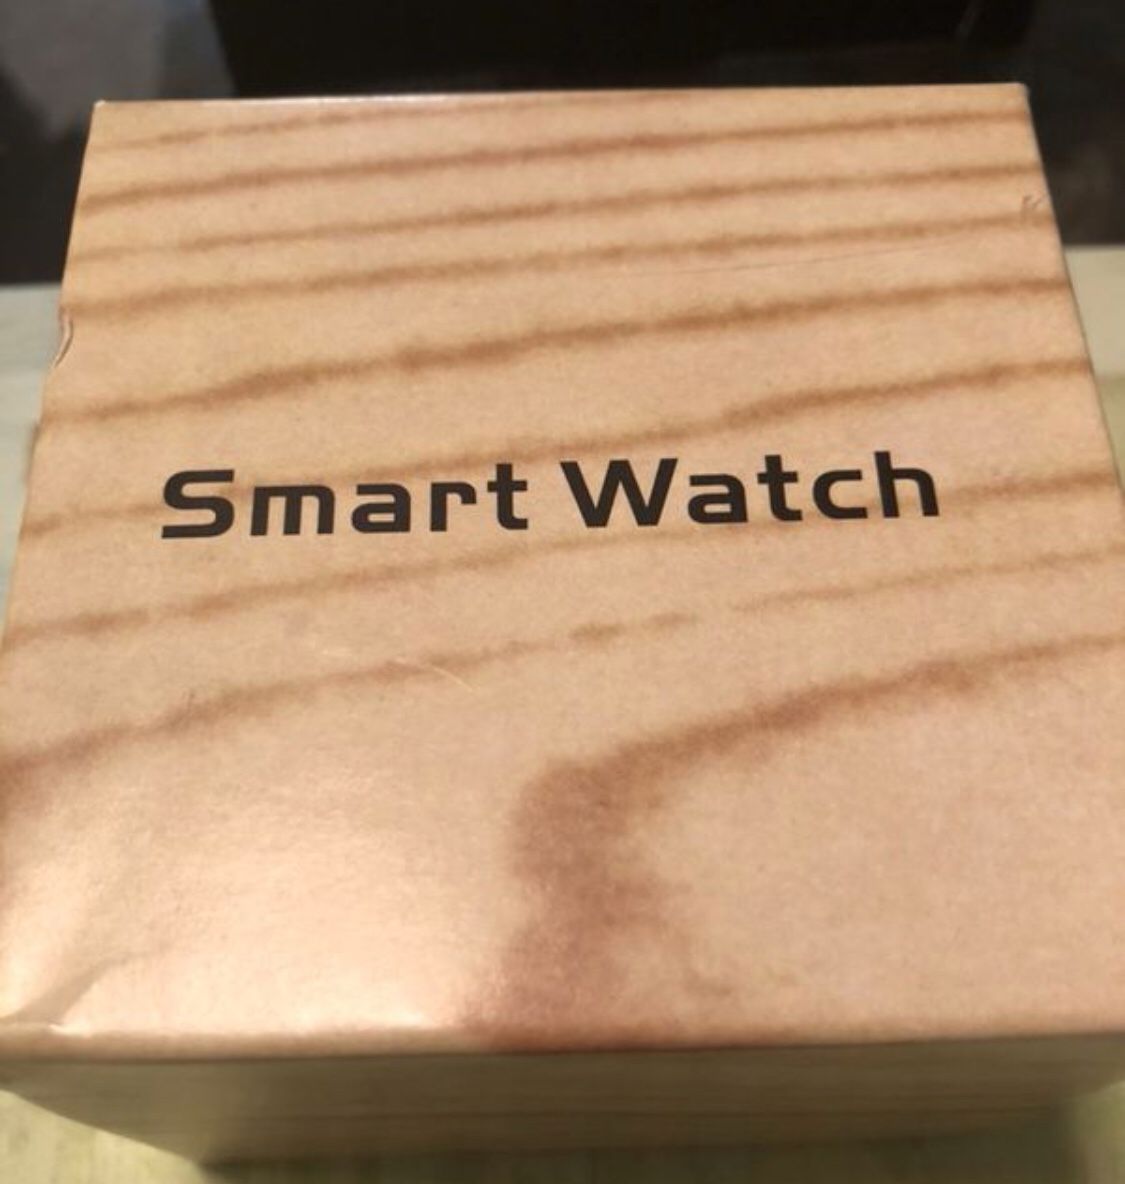 Smart watch for Android Phone